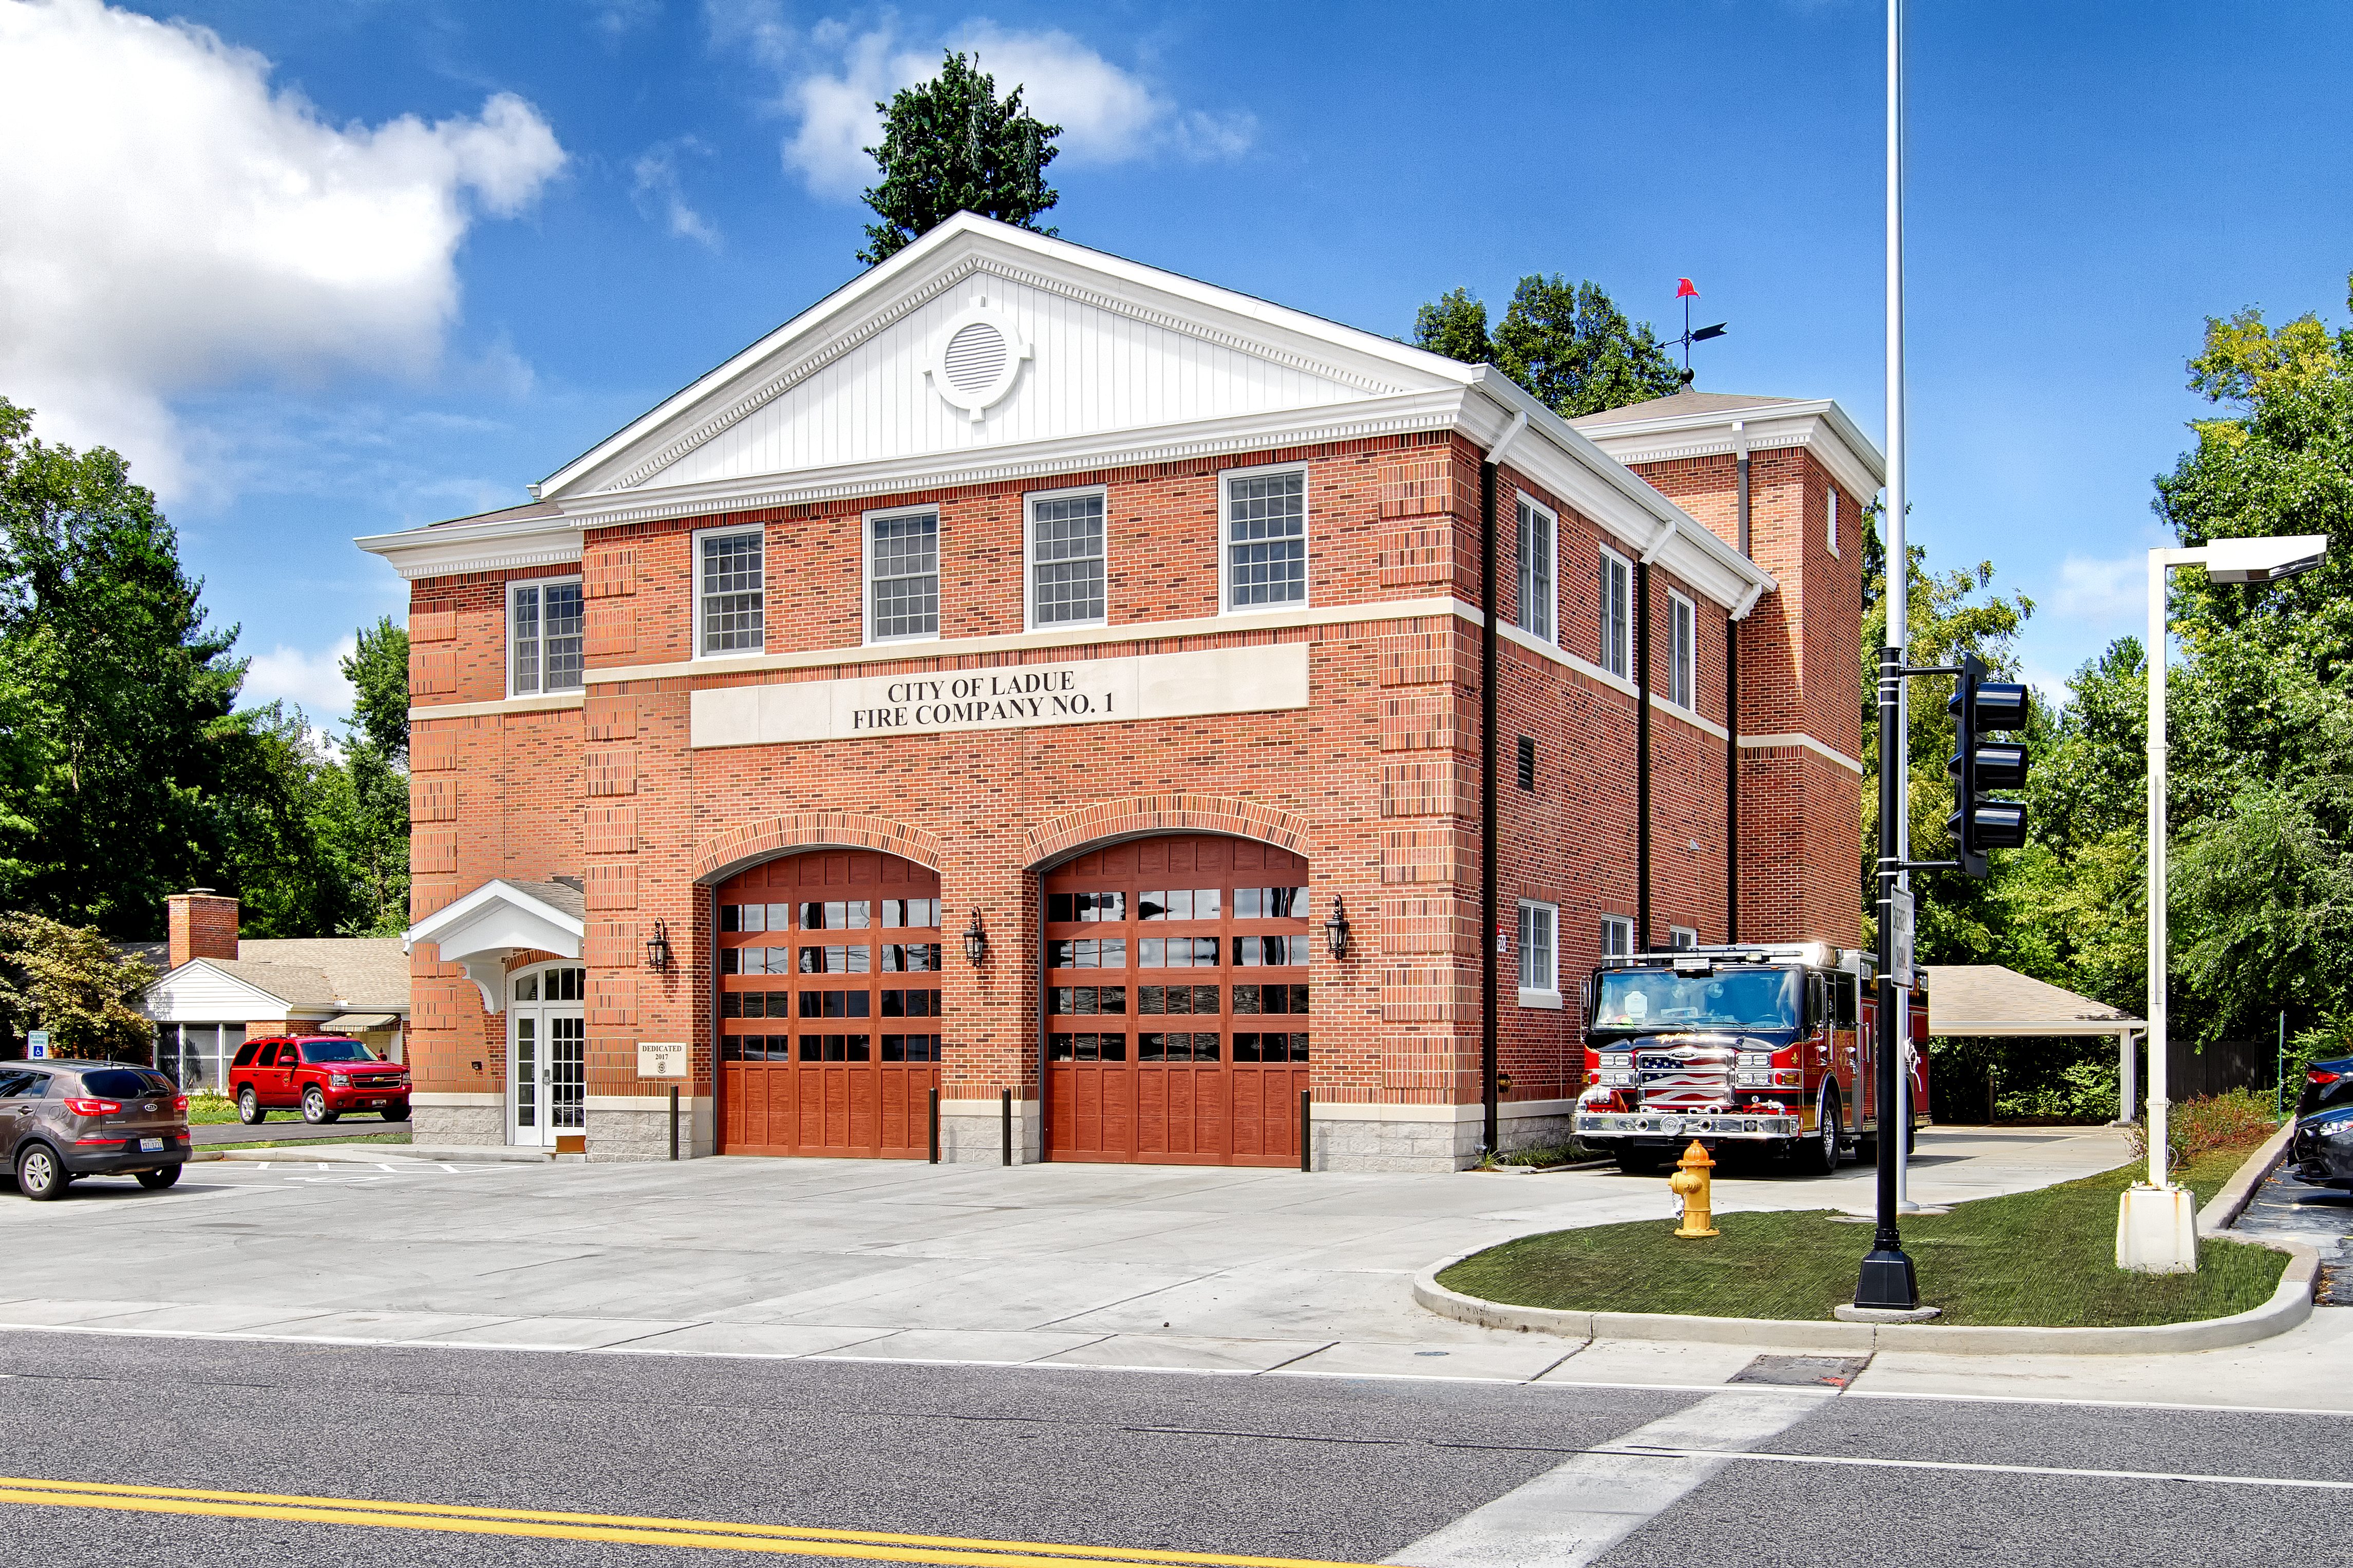 City of Ladue – Fire Station #1